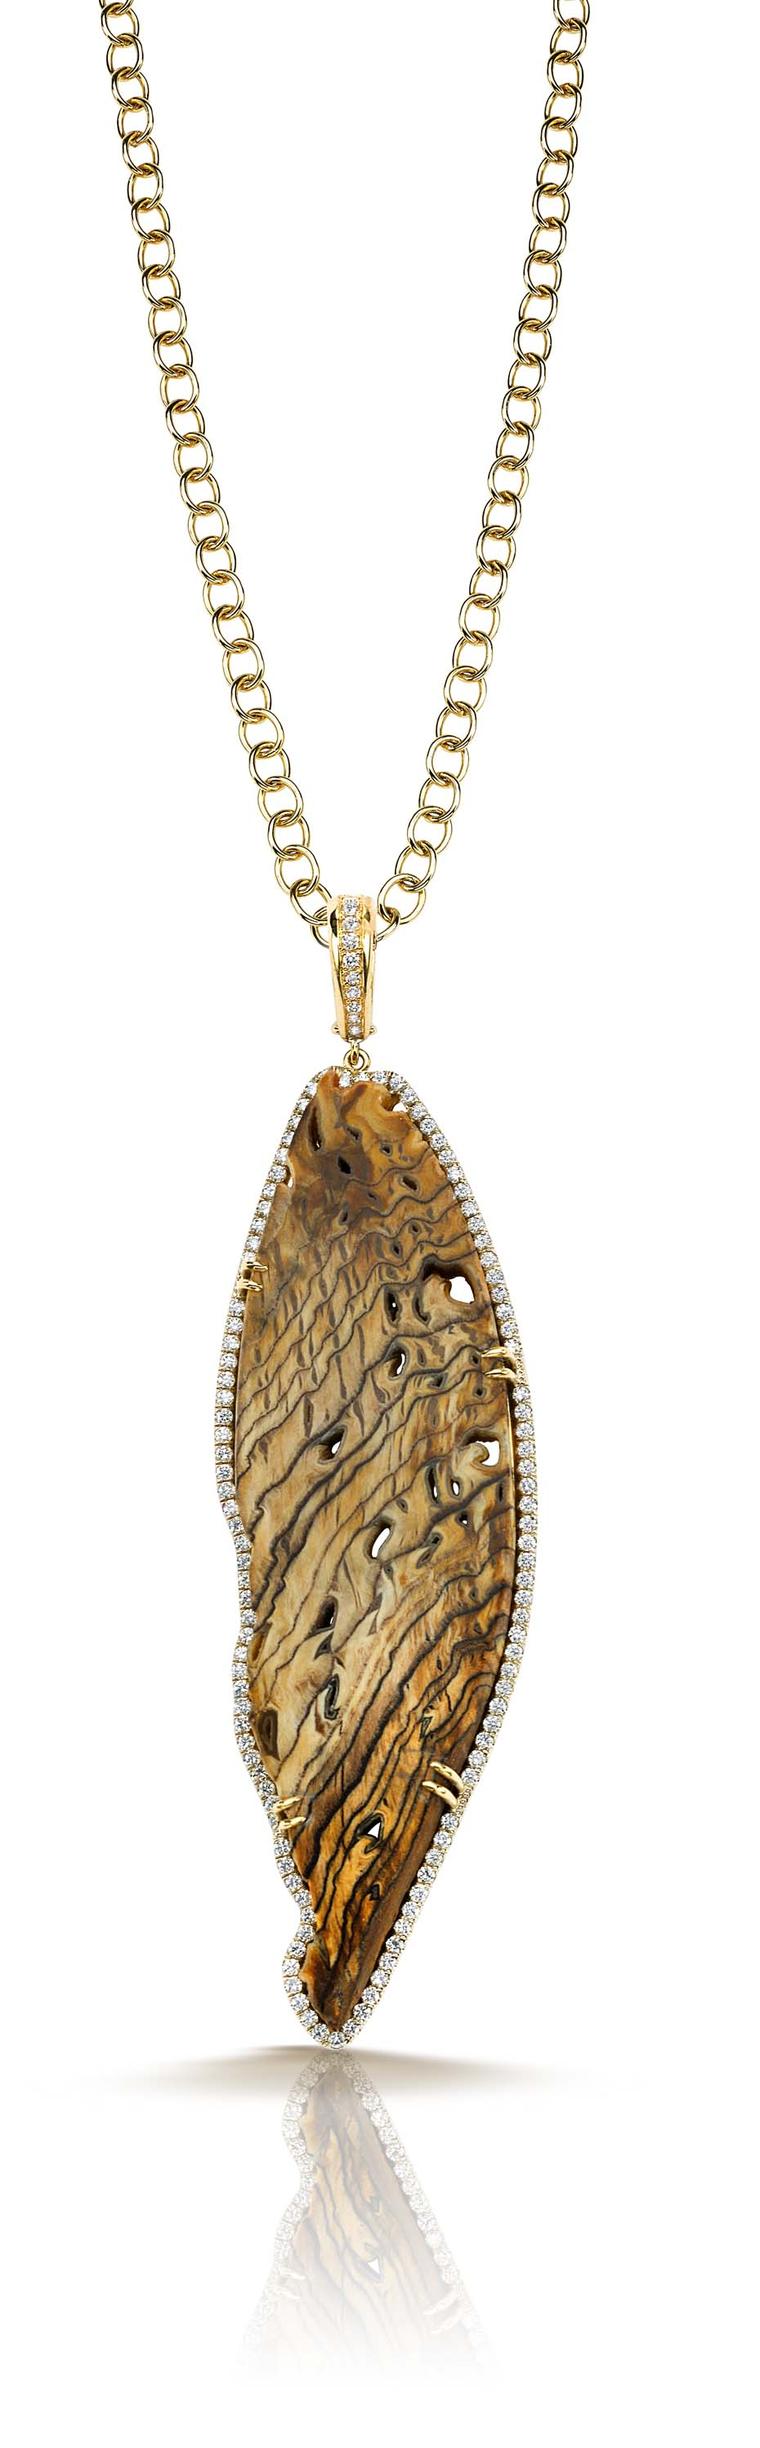 Pamela Huizenga gold pendant with a fossilized Sequoia center stone and a diamond pavé frame ($14,000).